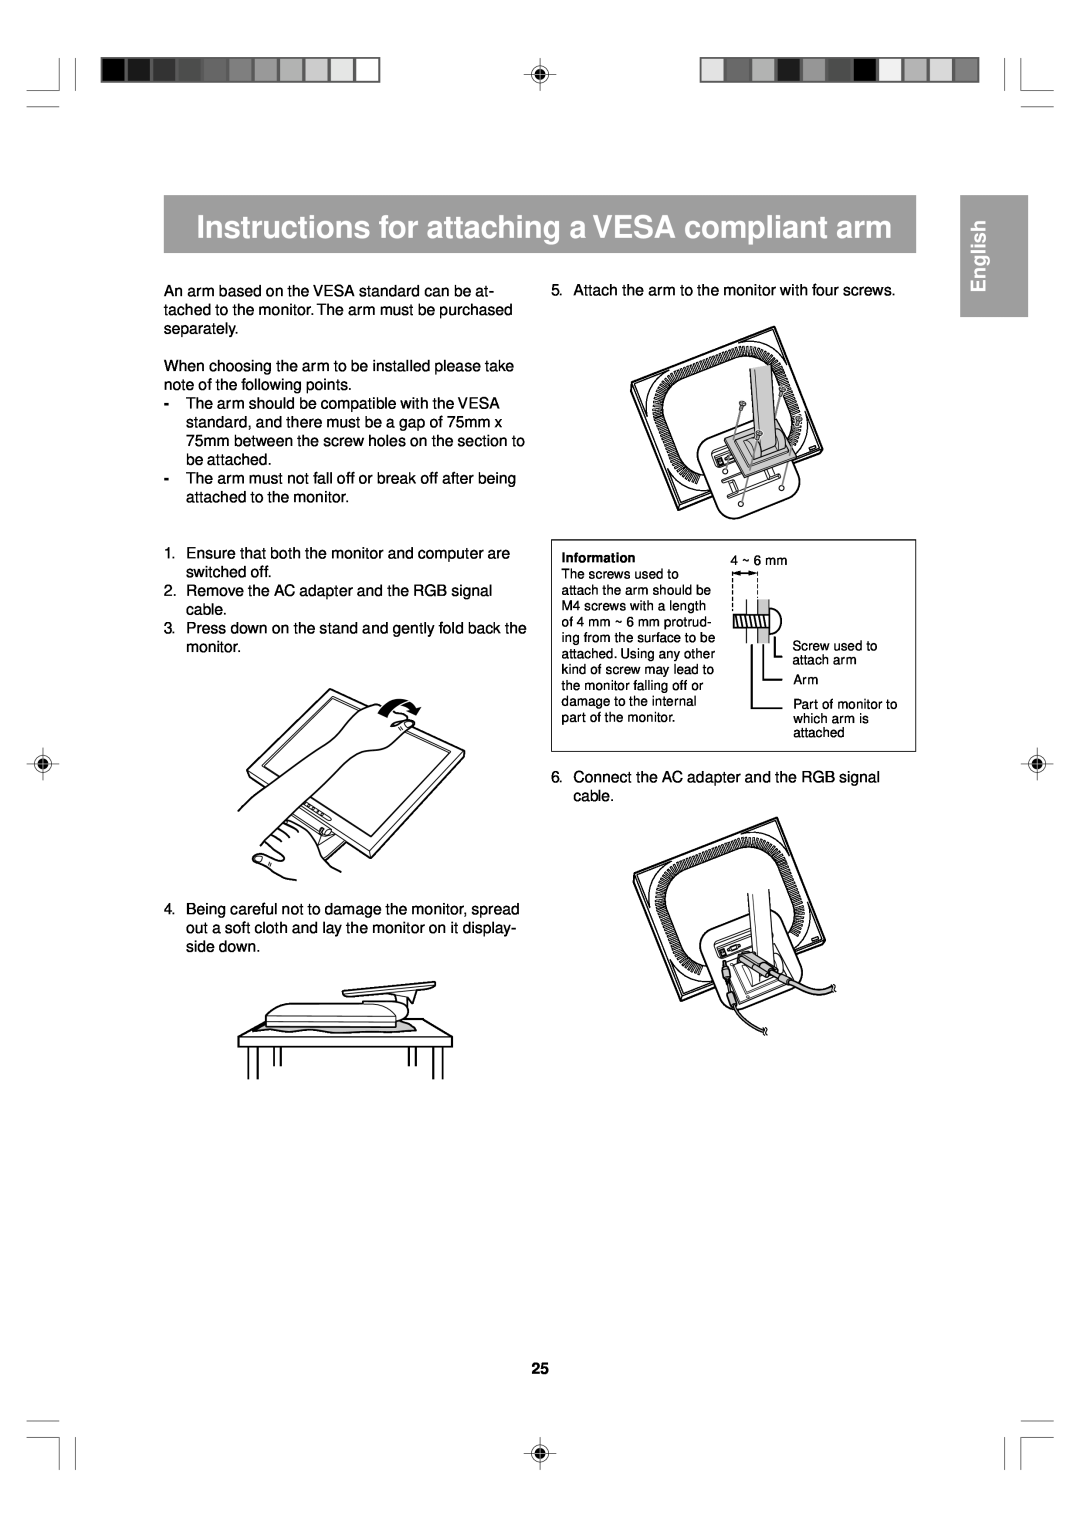 Sharp LL-T15V1 operation manual Instructions for attaching a VESA compliant arm, English 